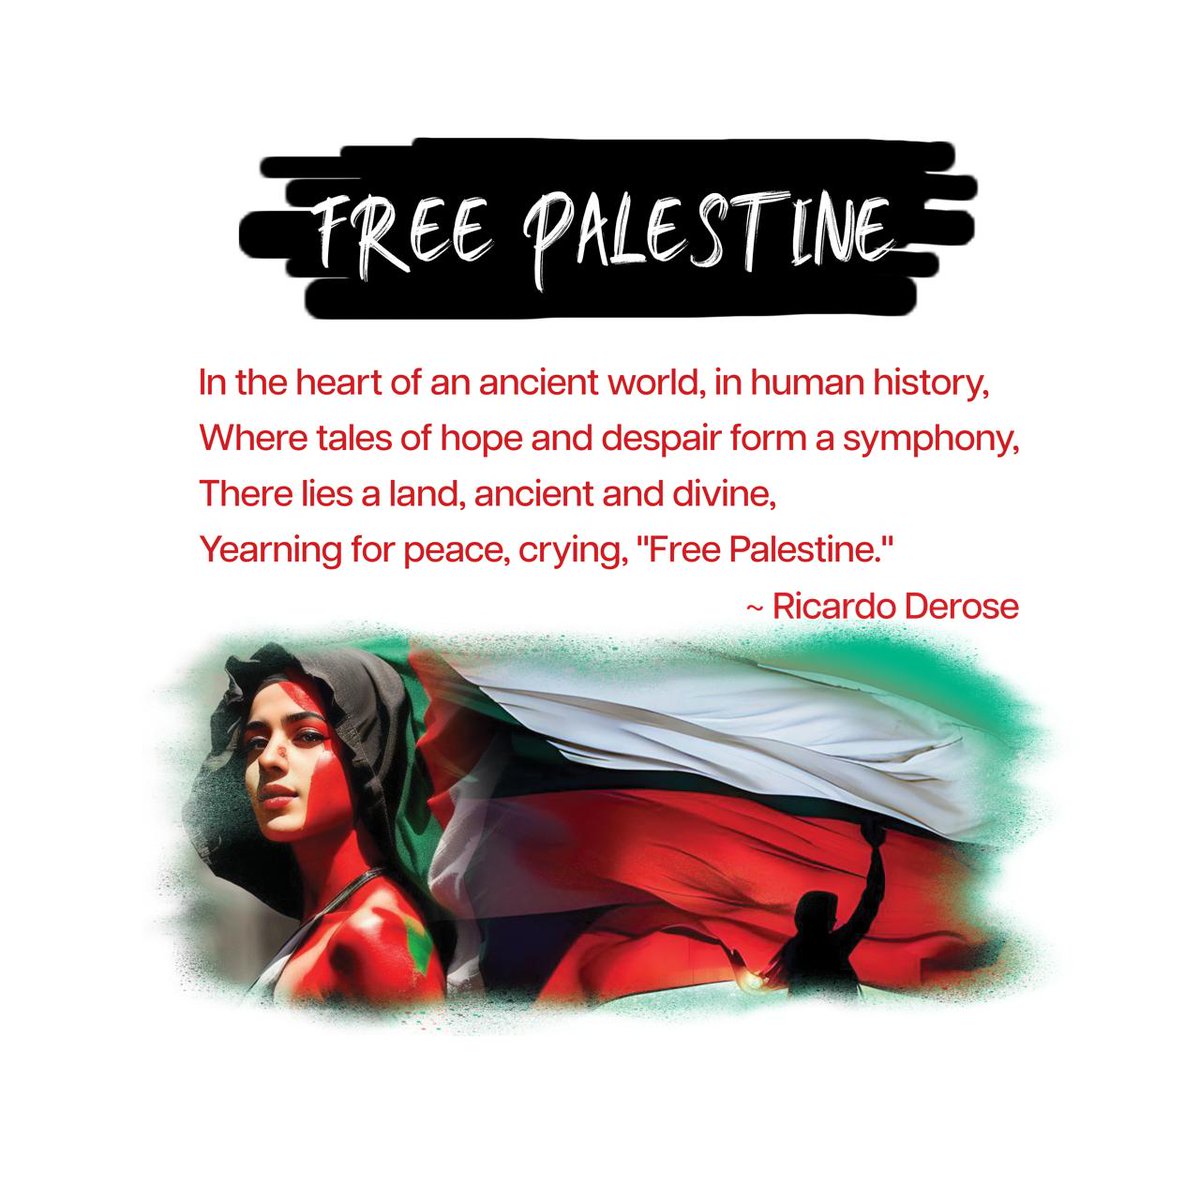 'Free Palestine: A Philoetic Ode to Freedom and Unity'

Online store: linktw.in/VYgsvv

#framedposter, #canvas, #freepalestine, #supportpalestine,  #justiceforpalestine, #boycottisrael, #palestinianrights, #history #philosophy, #poetry, #Igiveyou, #philoetry, #ricardo,